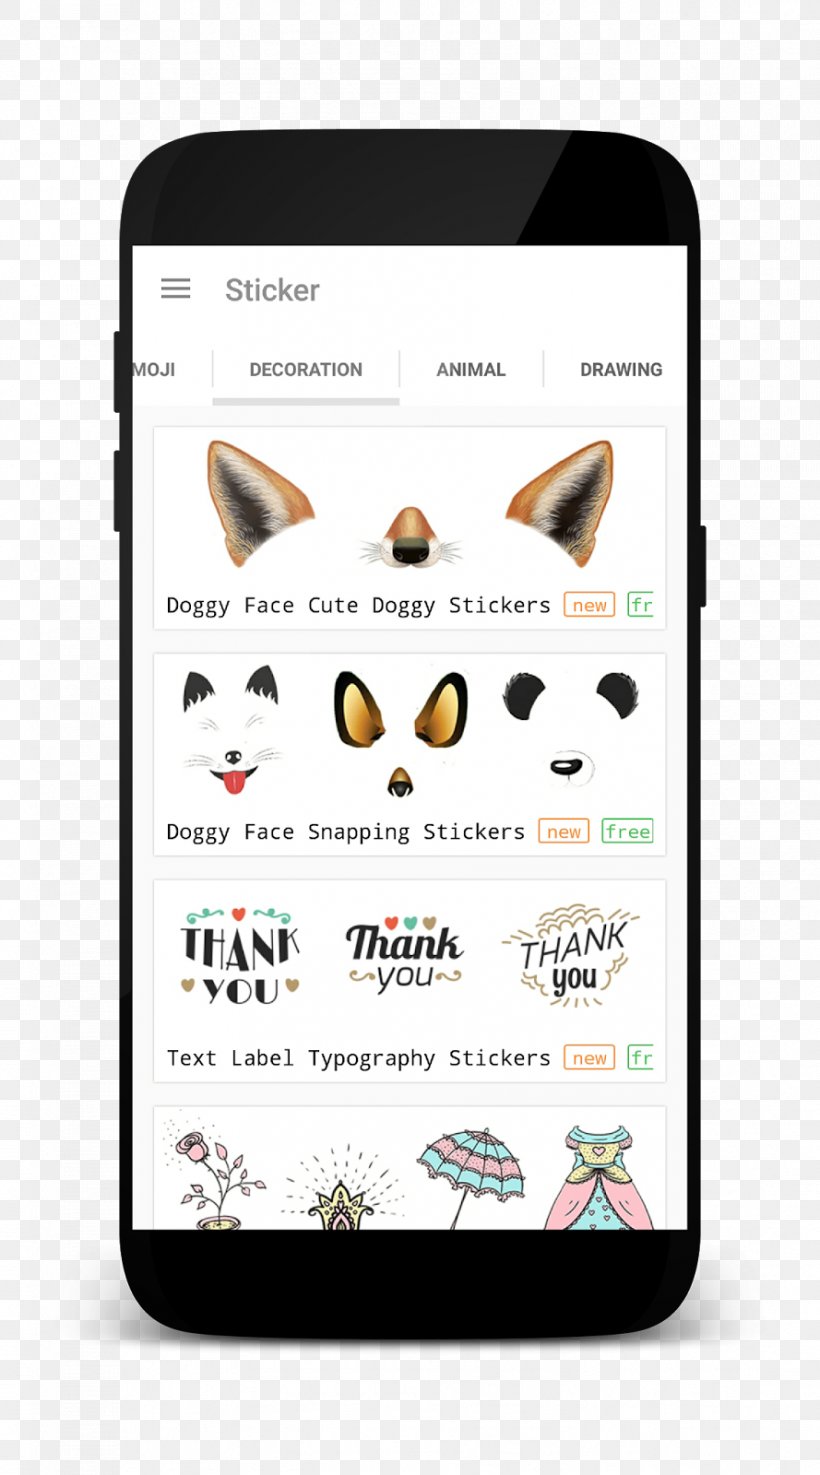 Mobile Phone Accessories Brand Font, PNG, 889x1600px, Mobile Phone Accessories, Brand, Iphone, Mobile Phones, Technology Download Free